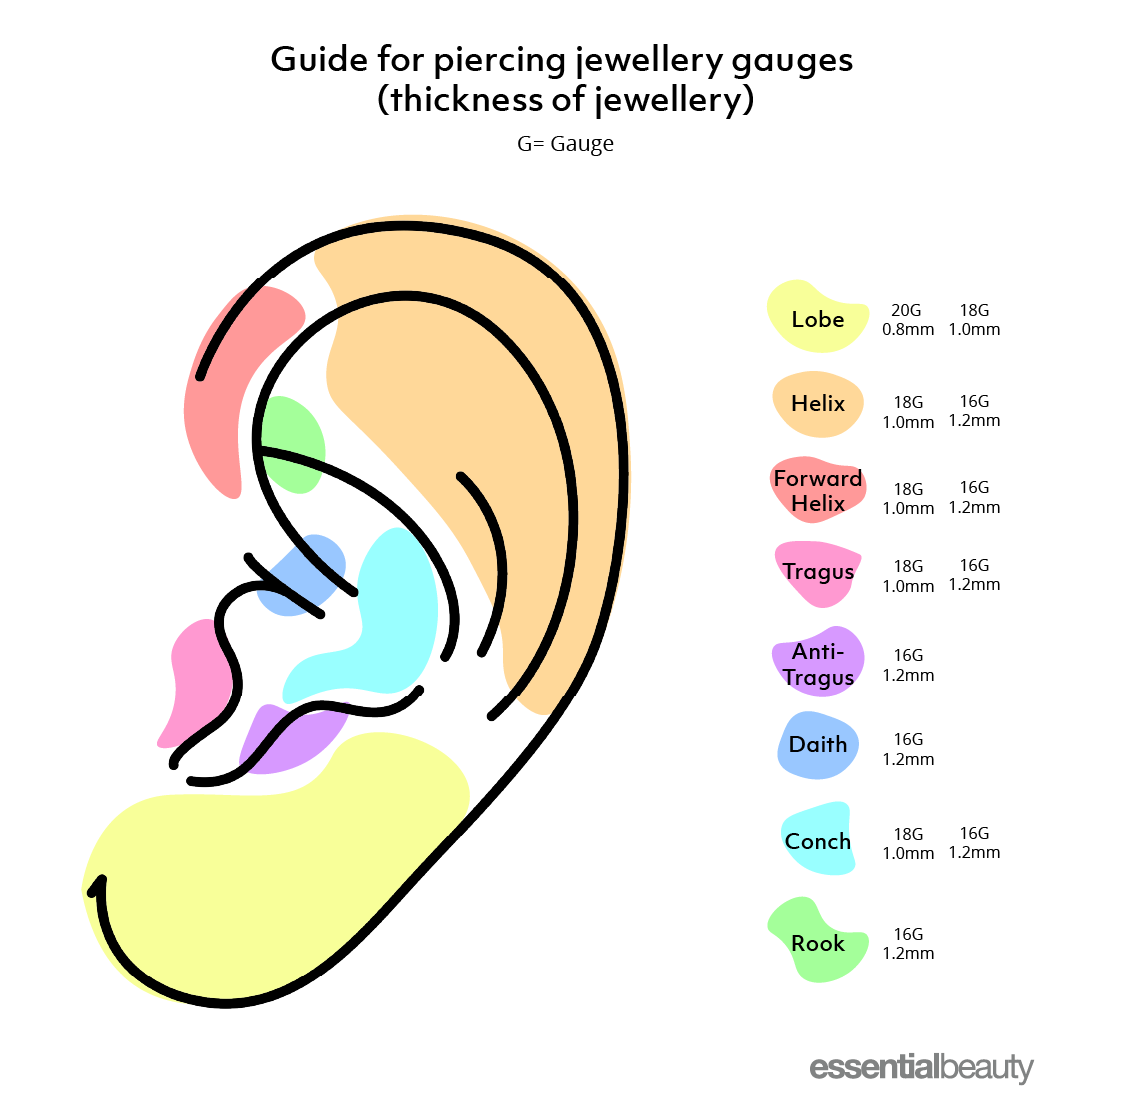 A guide for piercing jewellery gauge sizes 